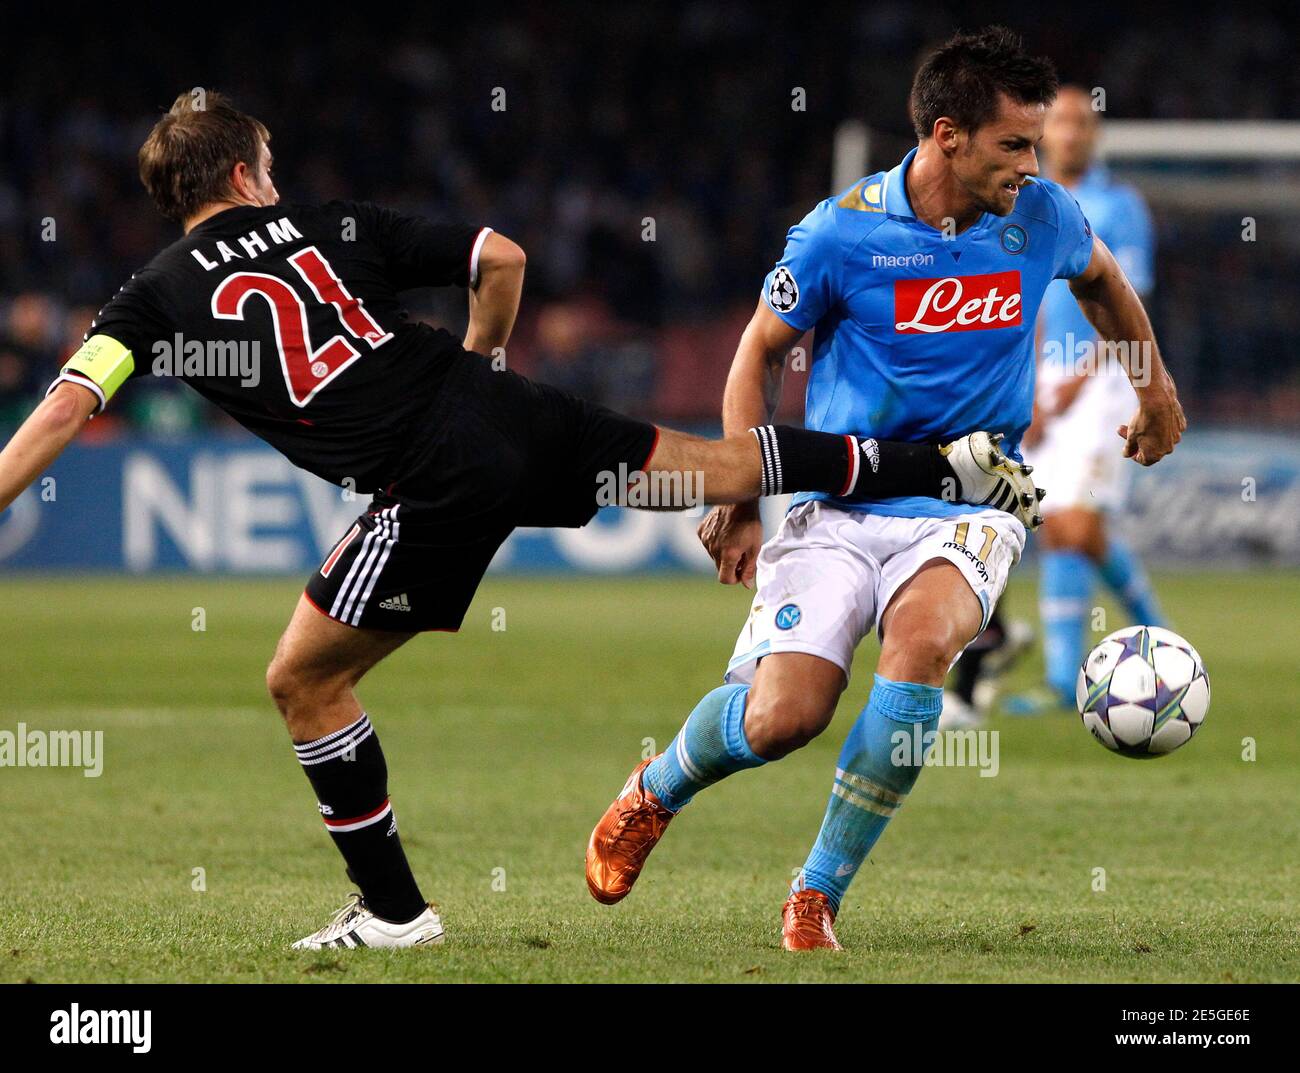 Napoli's Christian Maggio (R) challenges Philipp Lahm of Bayern Munich during their Champions League Group A soccer match at San Paolo stadium in Naples October 18, 2011.  REUTERS/Alessandro Bianchi( ITALY - Tags: SPORT SOCCER) Stock Photo